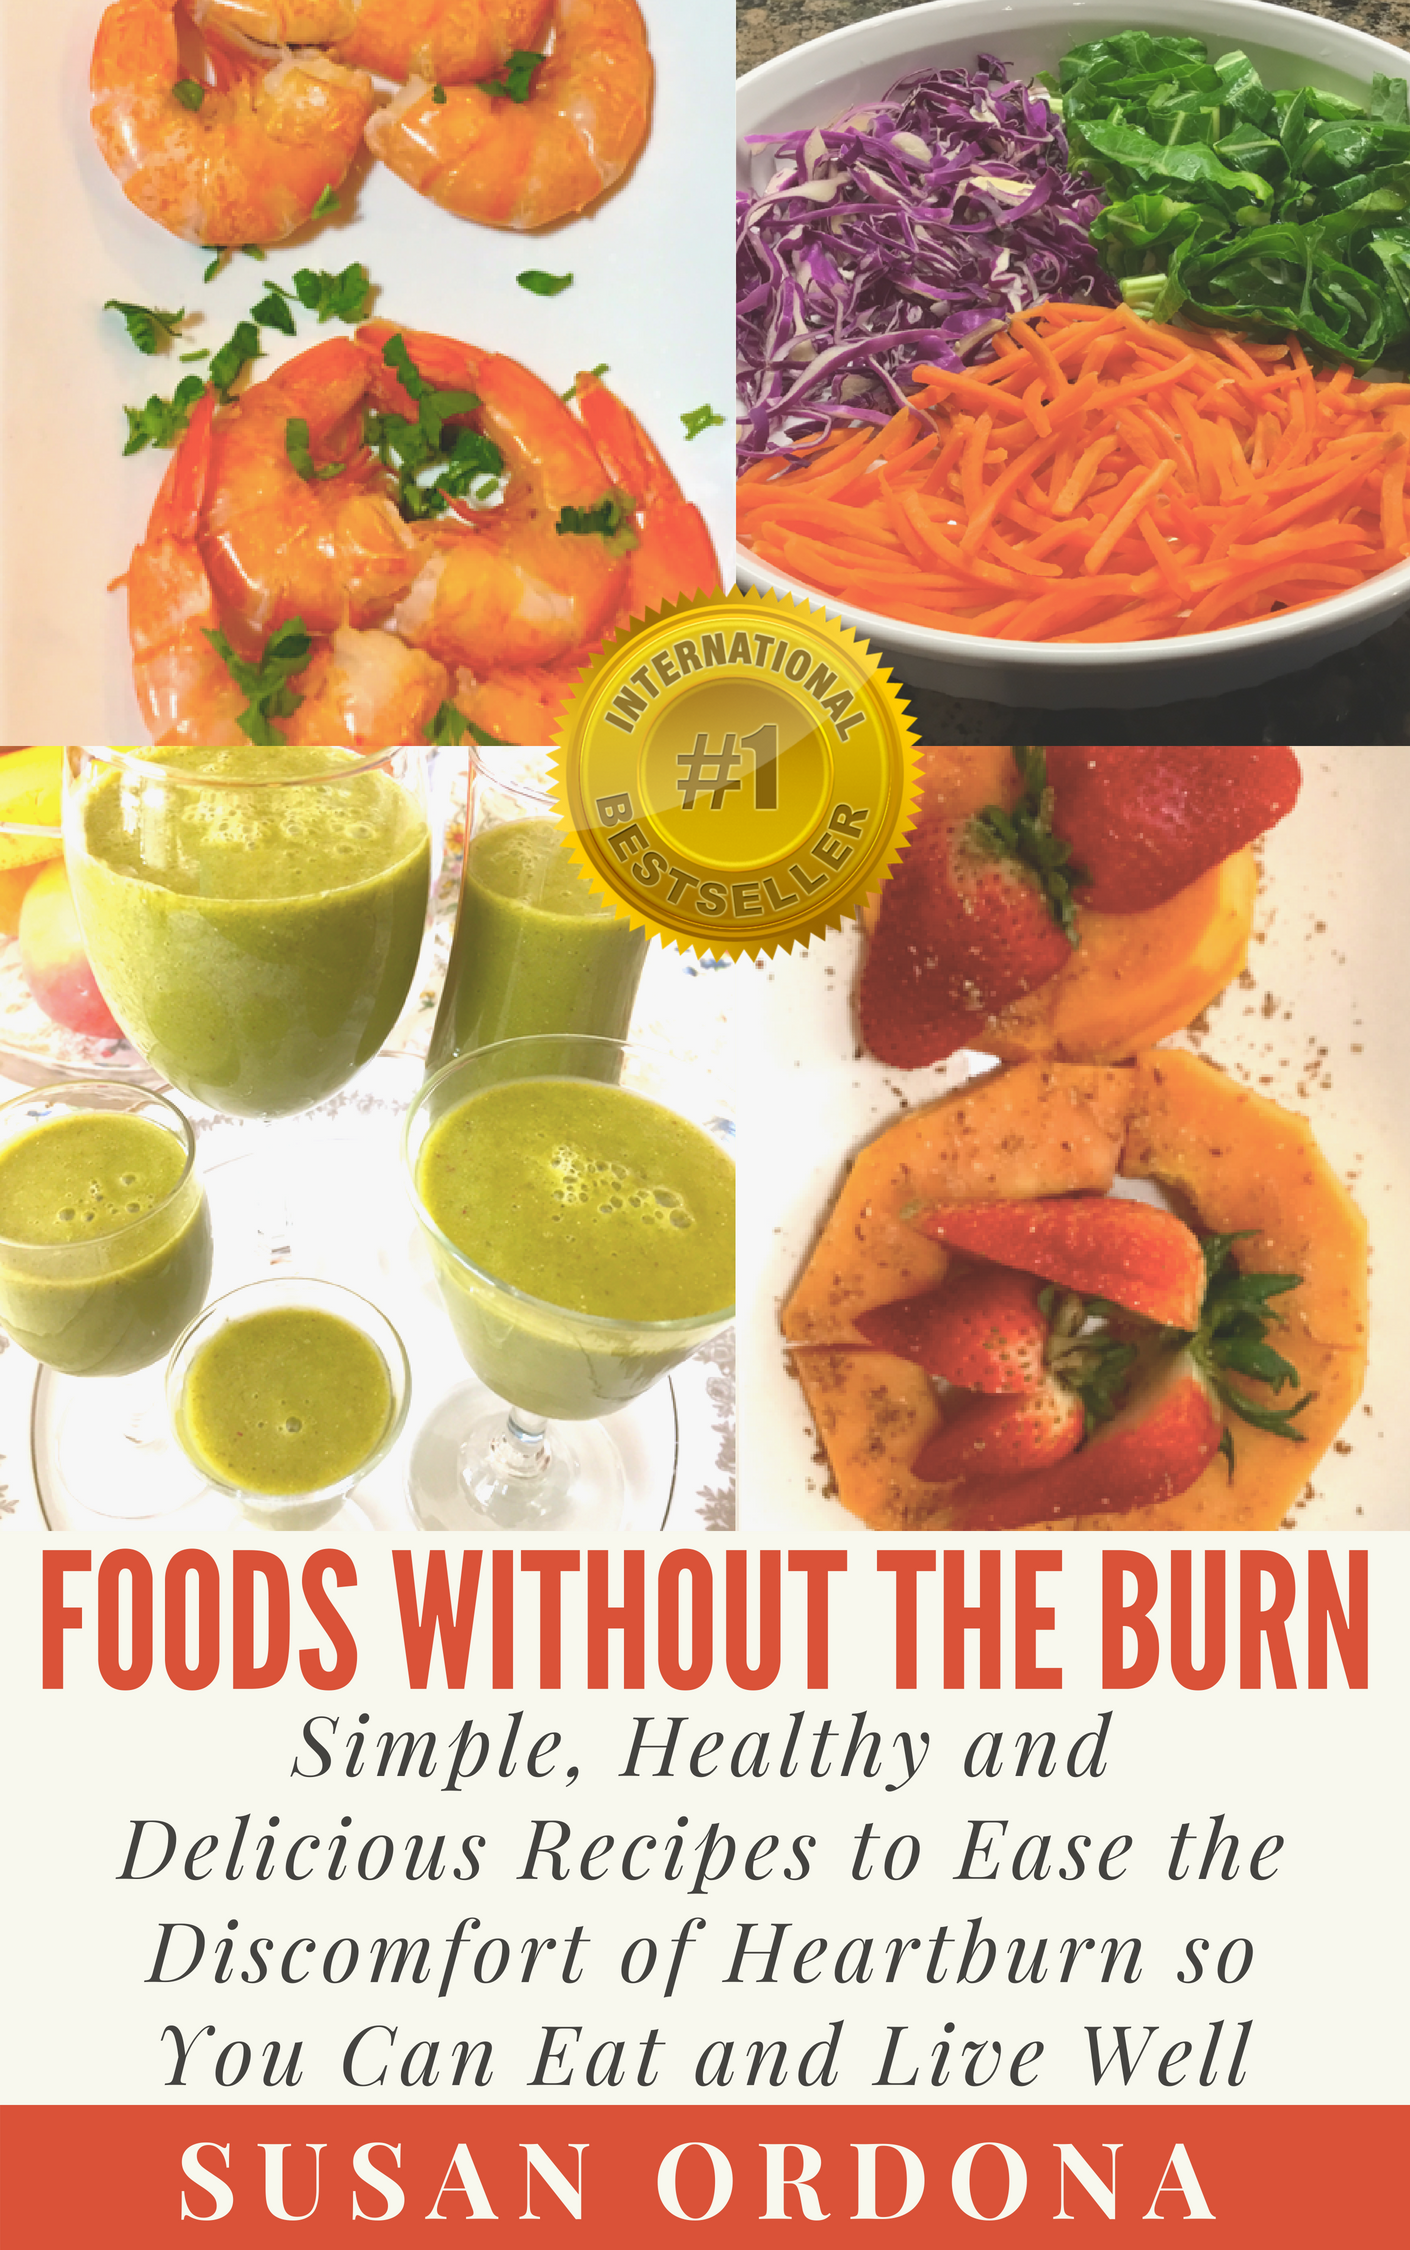 Foods Without The Burn cookbook'